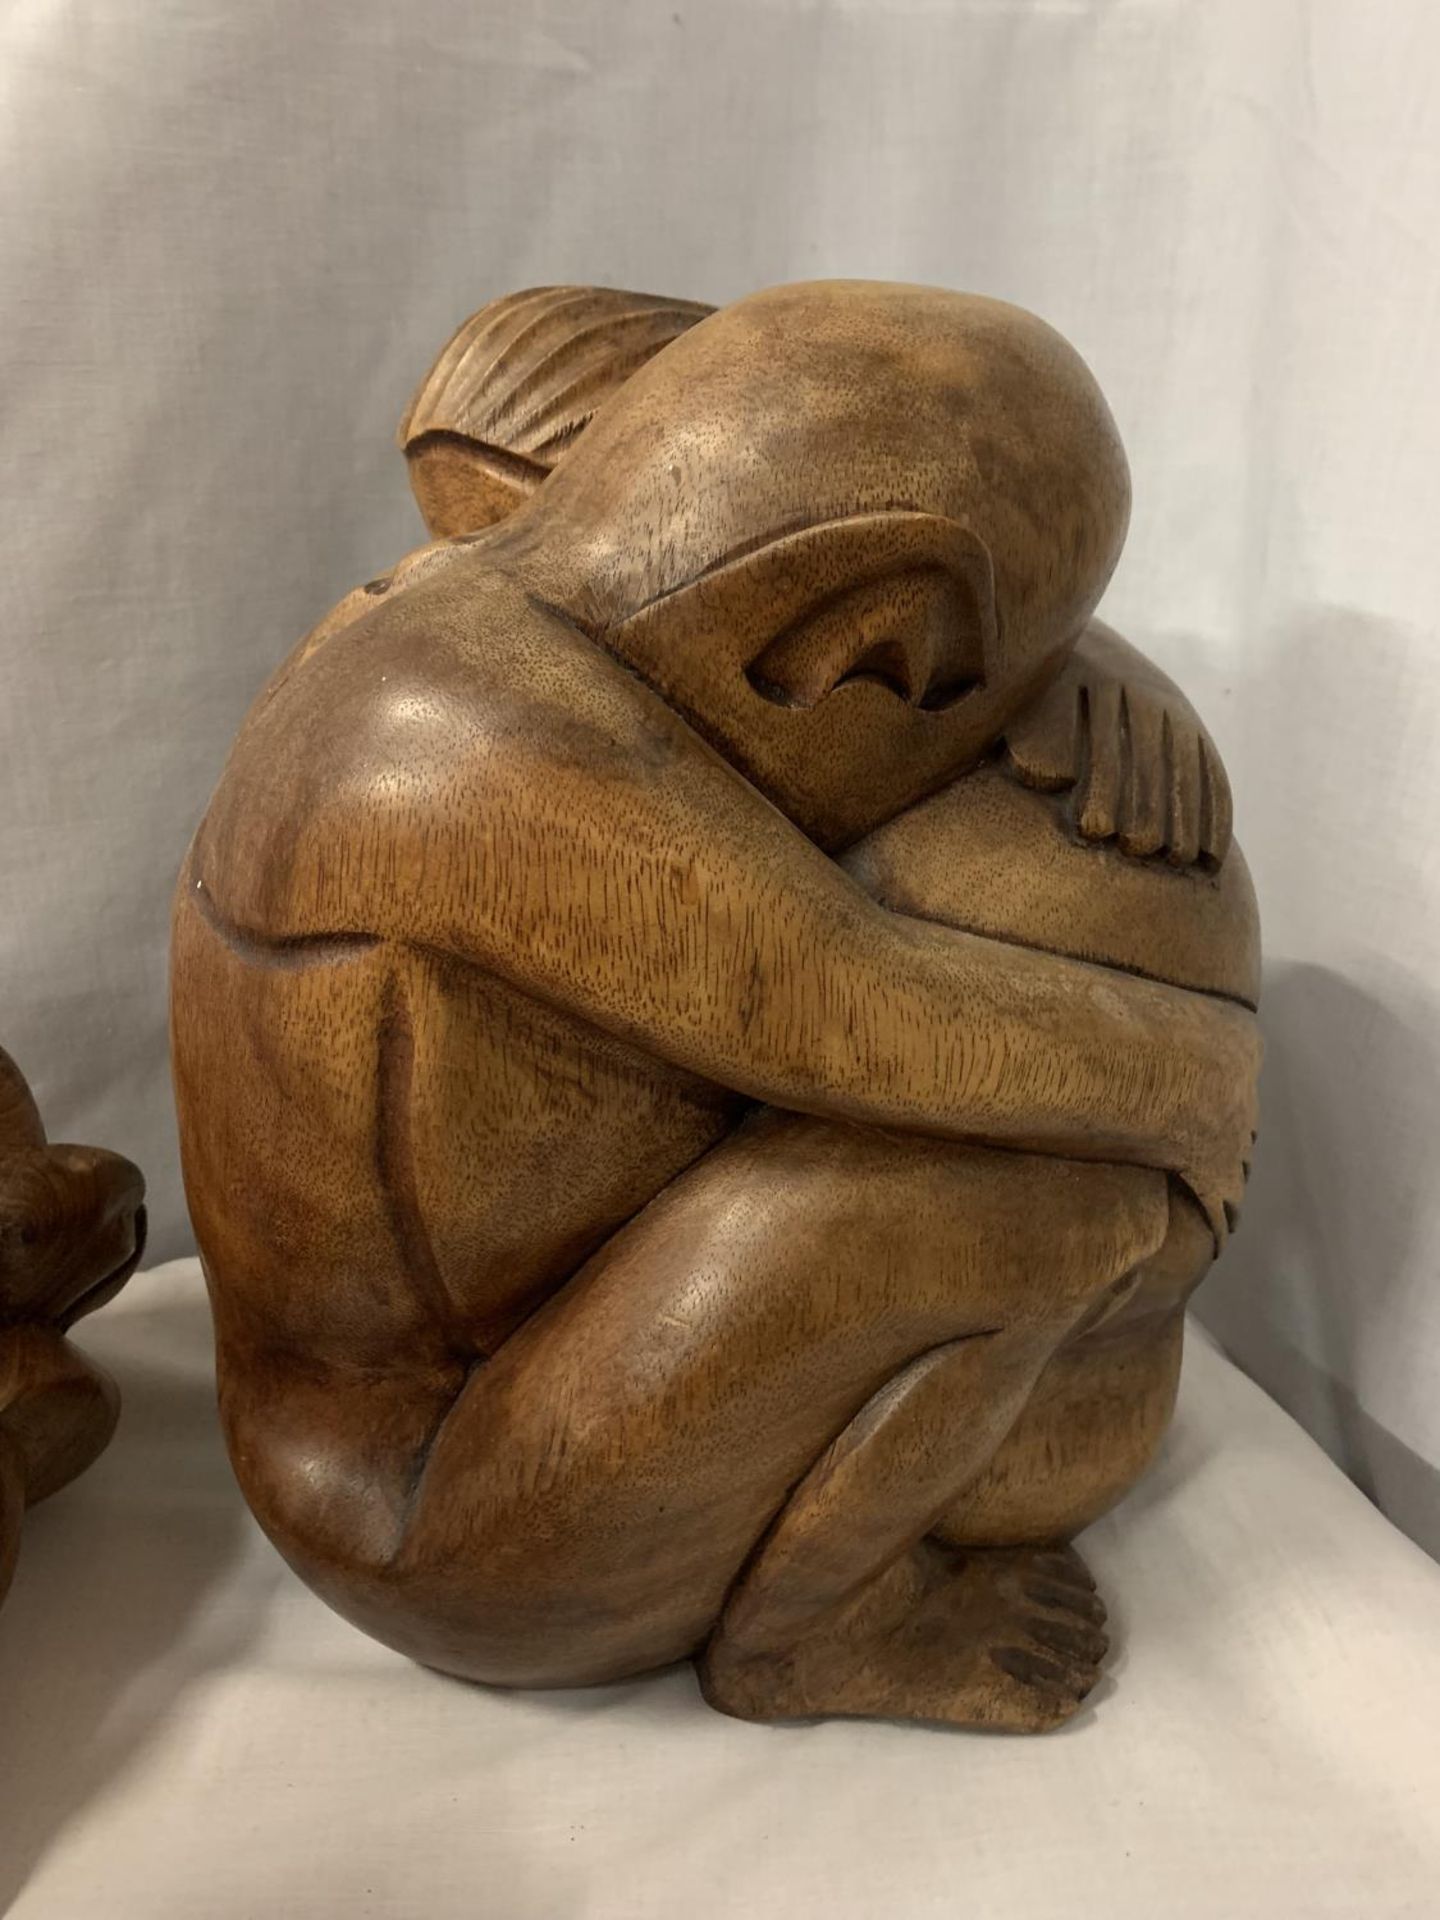 A SET OF THREE CARVED WOODEN FIGURES, ONE OF AN EMBRACING COUPLE, TWO INDIVIDUAL FIGURES - Image 4 of 5